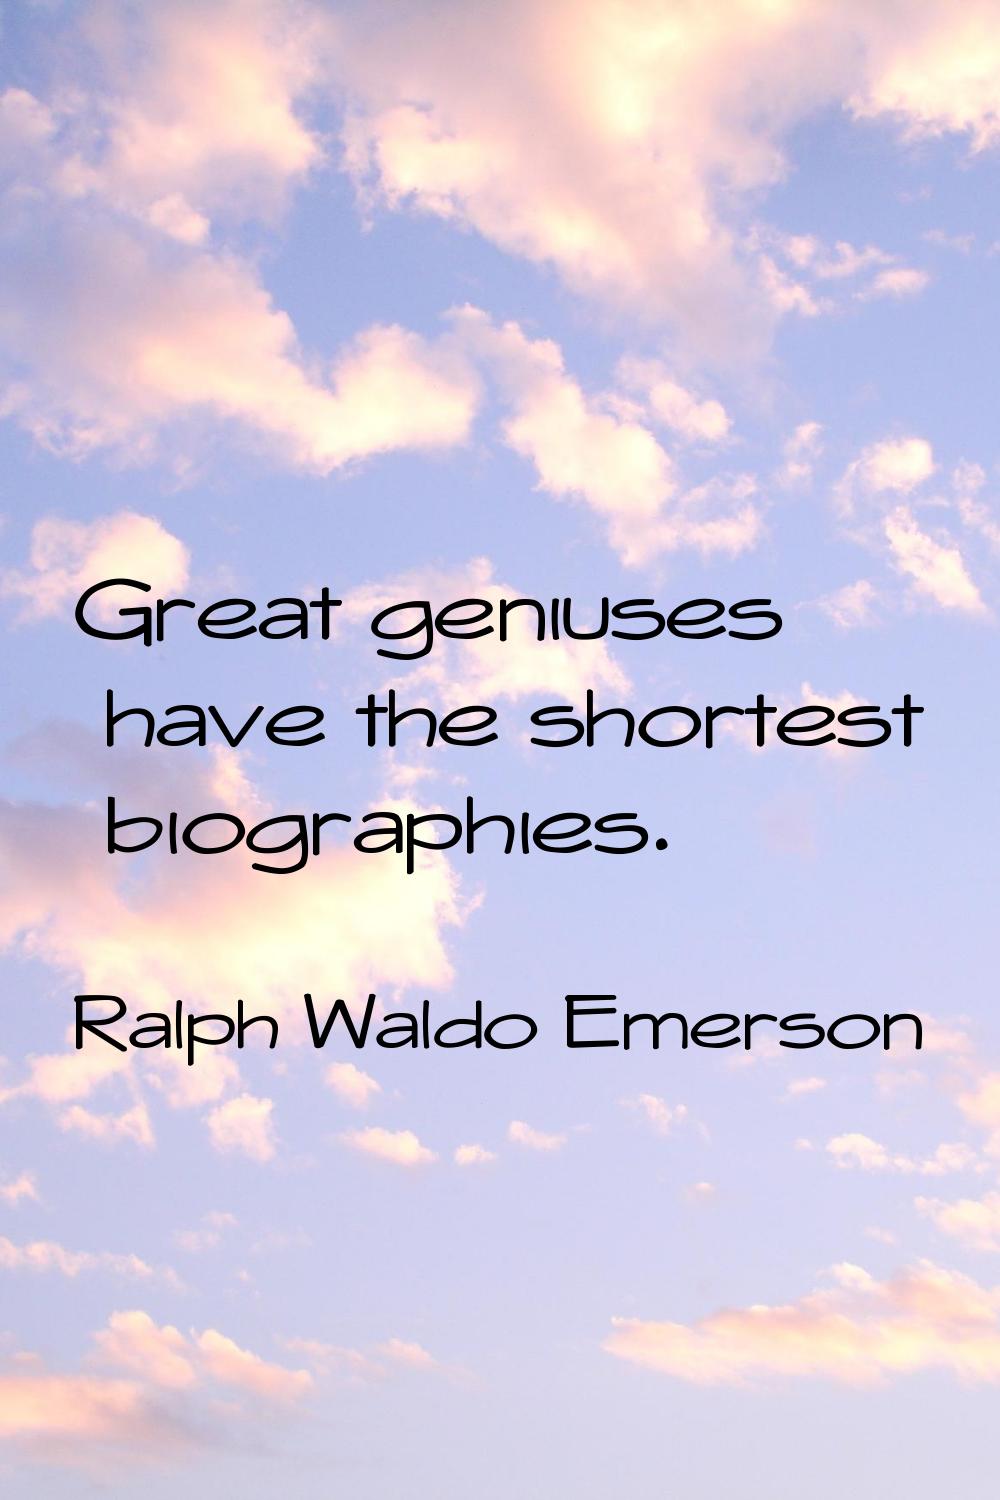 Great geniuses have the shortest biographies.